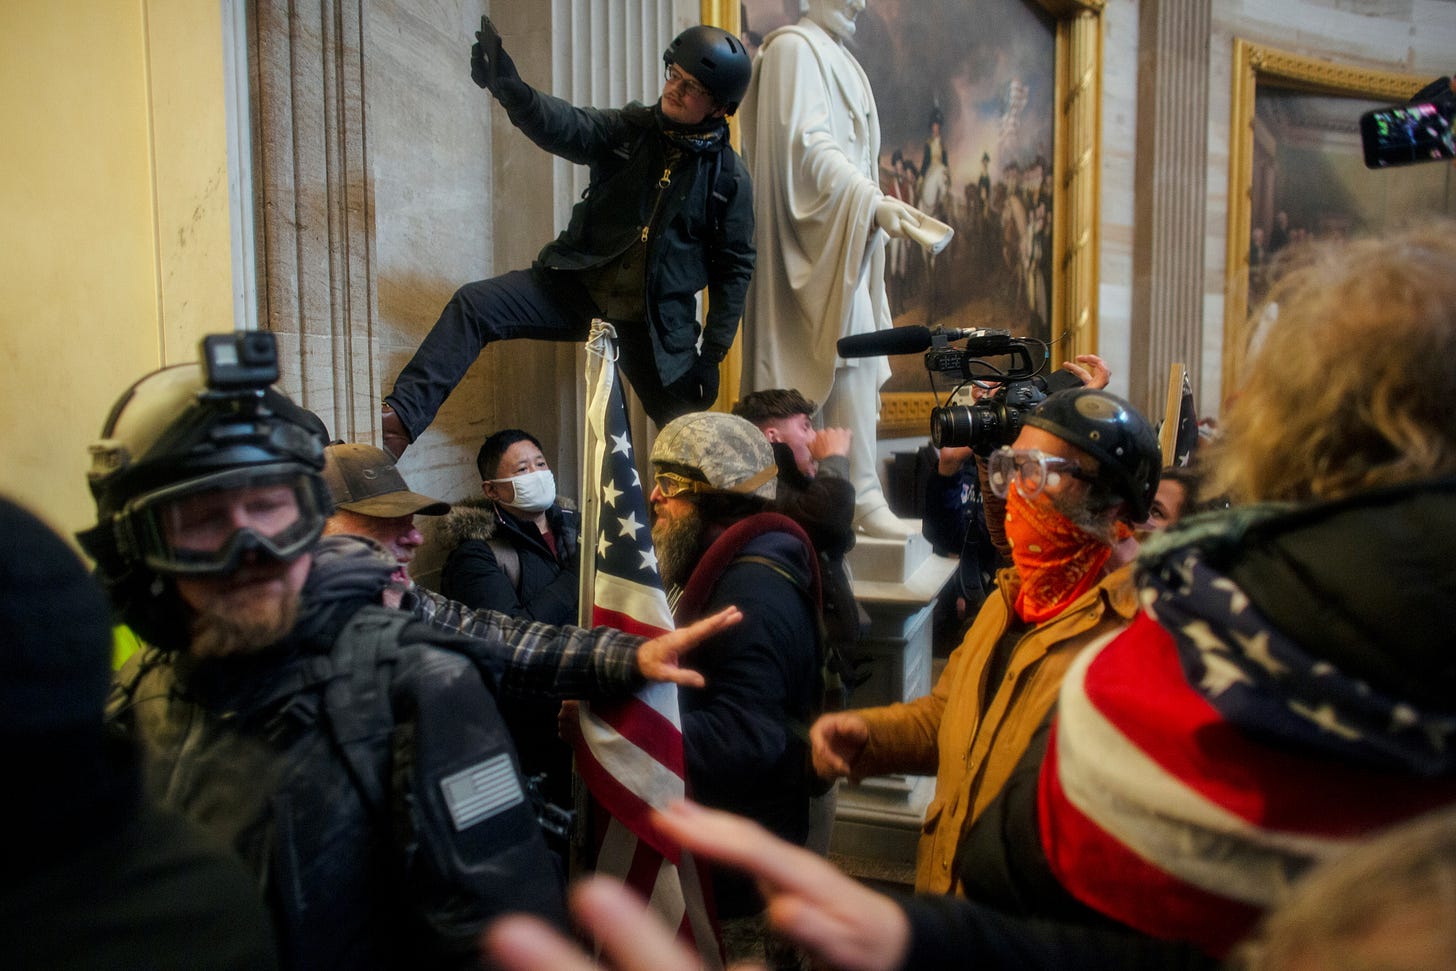 Pro-Trump protesters storm the U.S. Capitol to contest the certification of the 2020 U.S. presidential election results by the U.S. Congress, at the U.S. Capitol Building in Washington, D.C., U.S. January 6, 2021. Picture taken January 6, 2021. REUTERS/Ahmed Gaber - RC263L9P157M